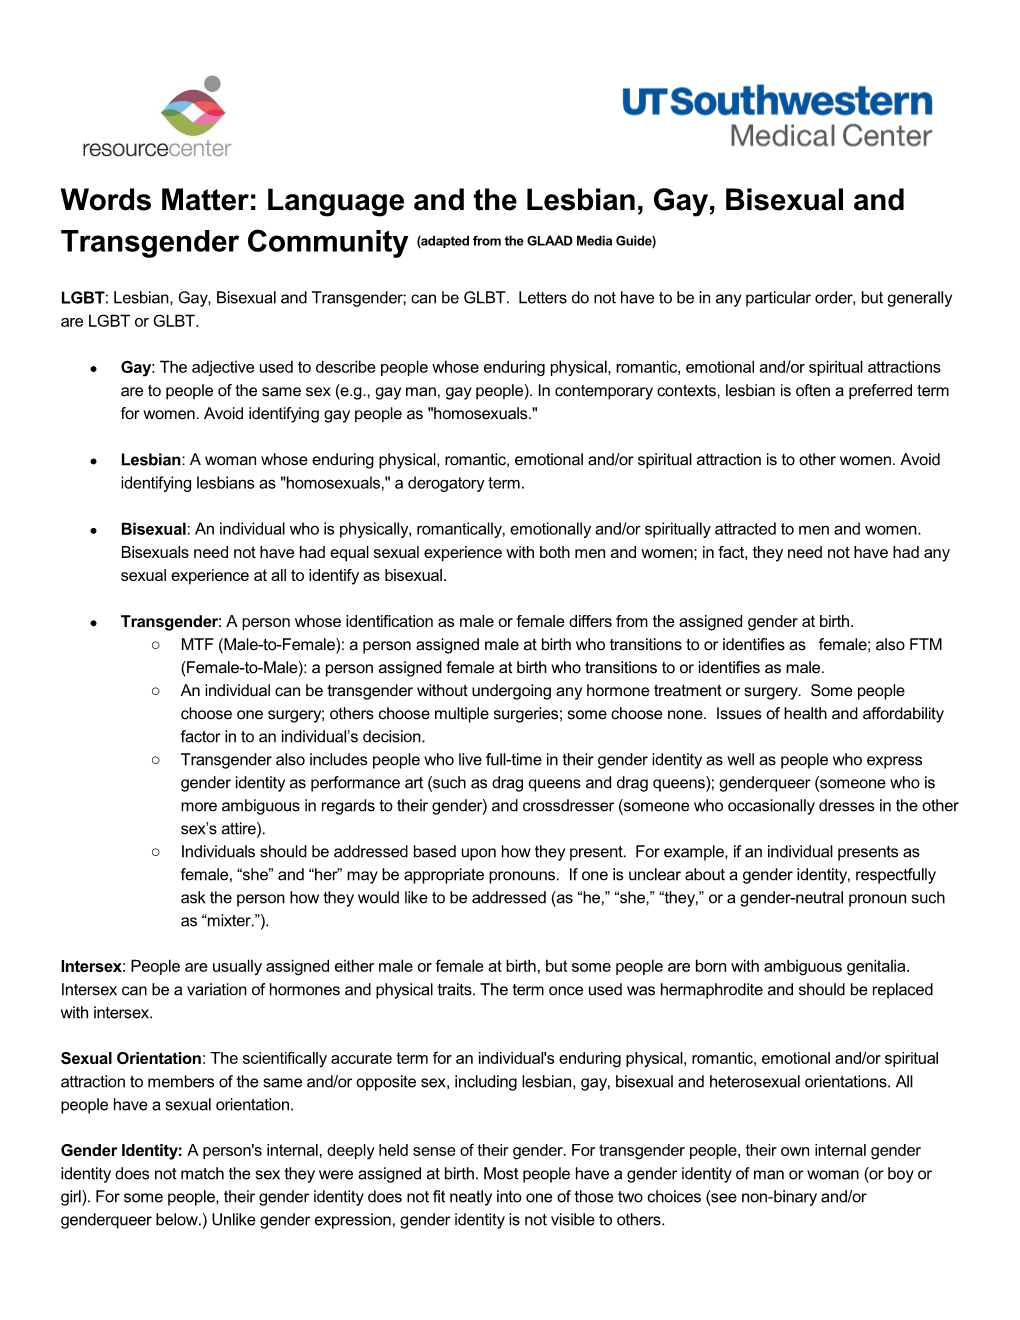 Words Matter: Language and the Lesbian, Gay, Bisexual and Transgender Community (Adapted from the GLAAD Media Guide)